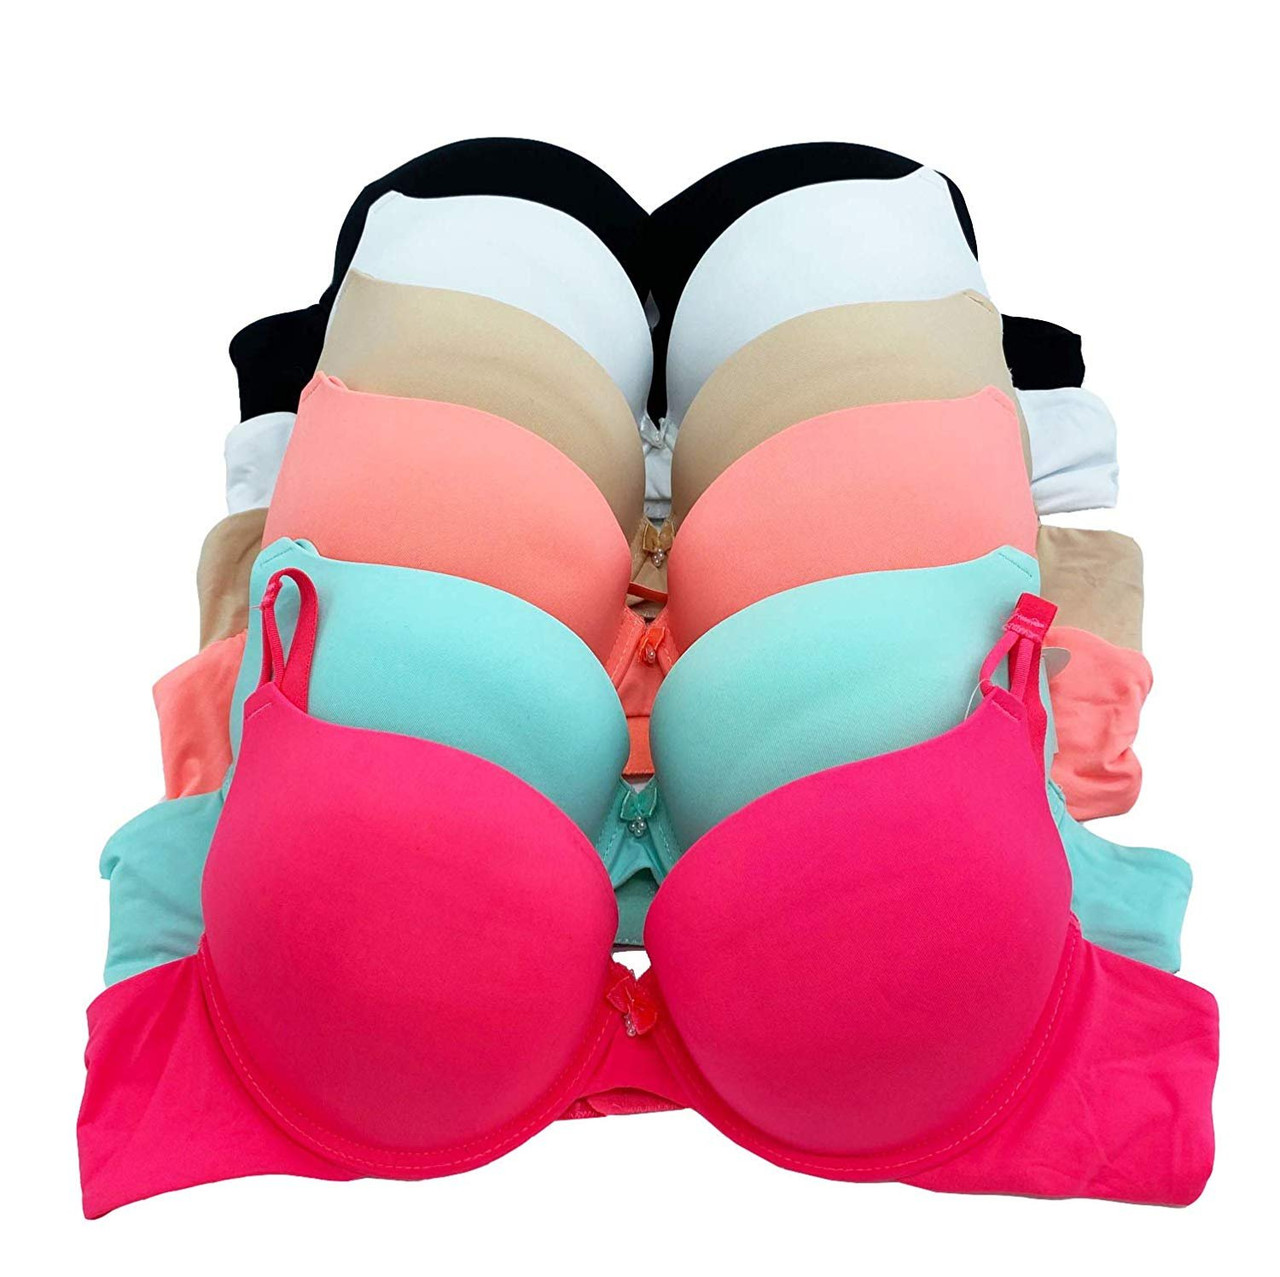 Various Colored Push-up Bras Extreme Close-up Stock Photo 1117558769